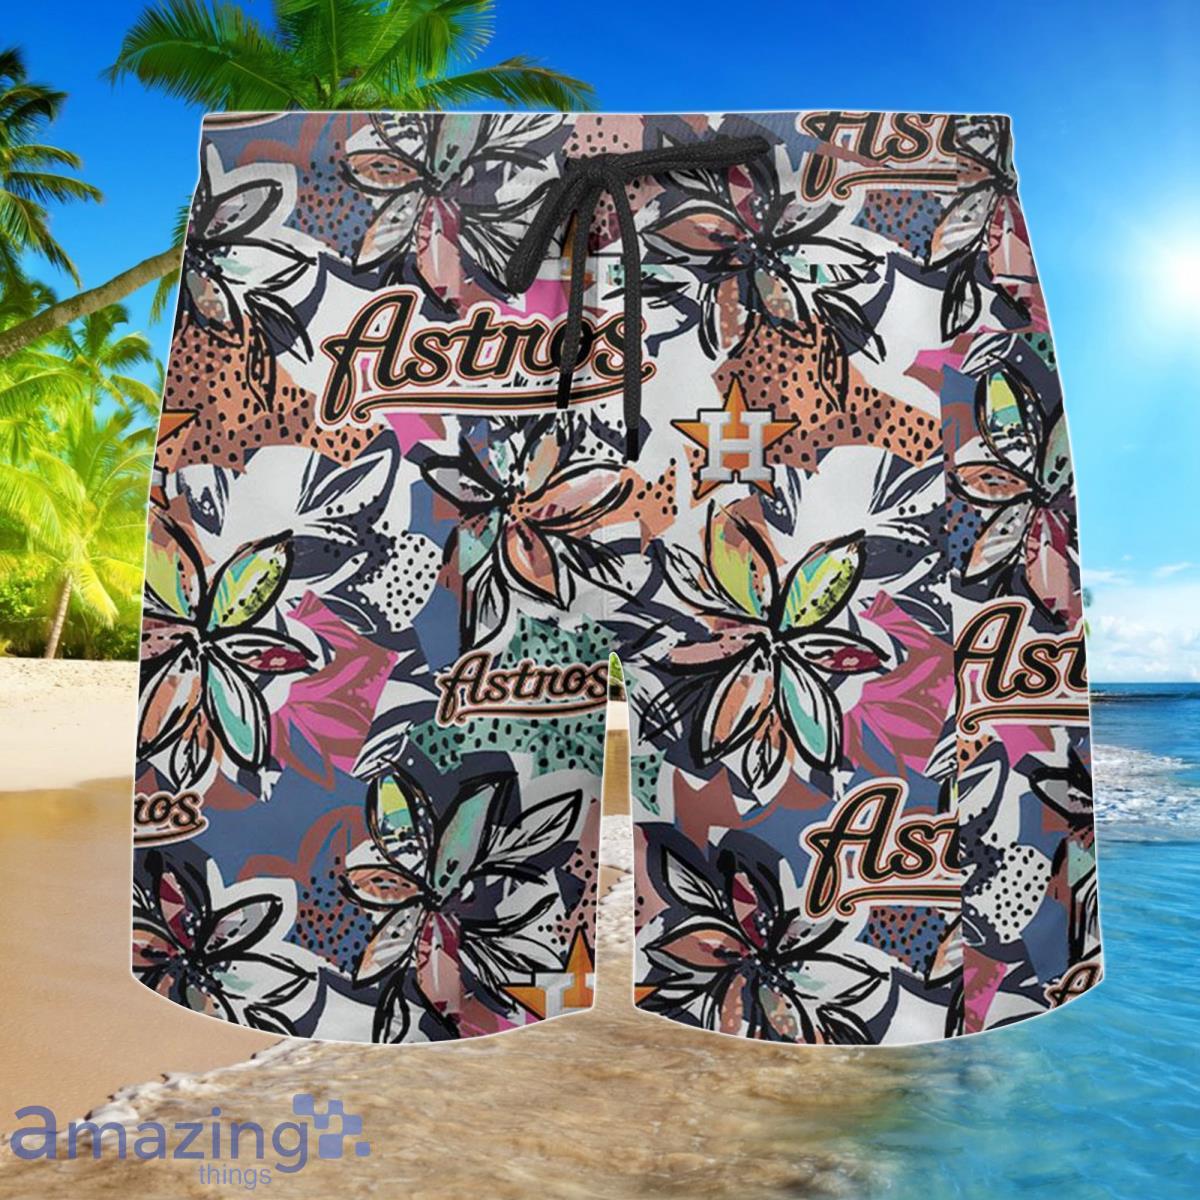 Houston Astros Floral Vintage Hawaiian Shirt And Shorts For Men Women